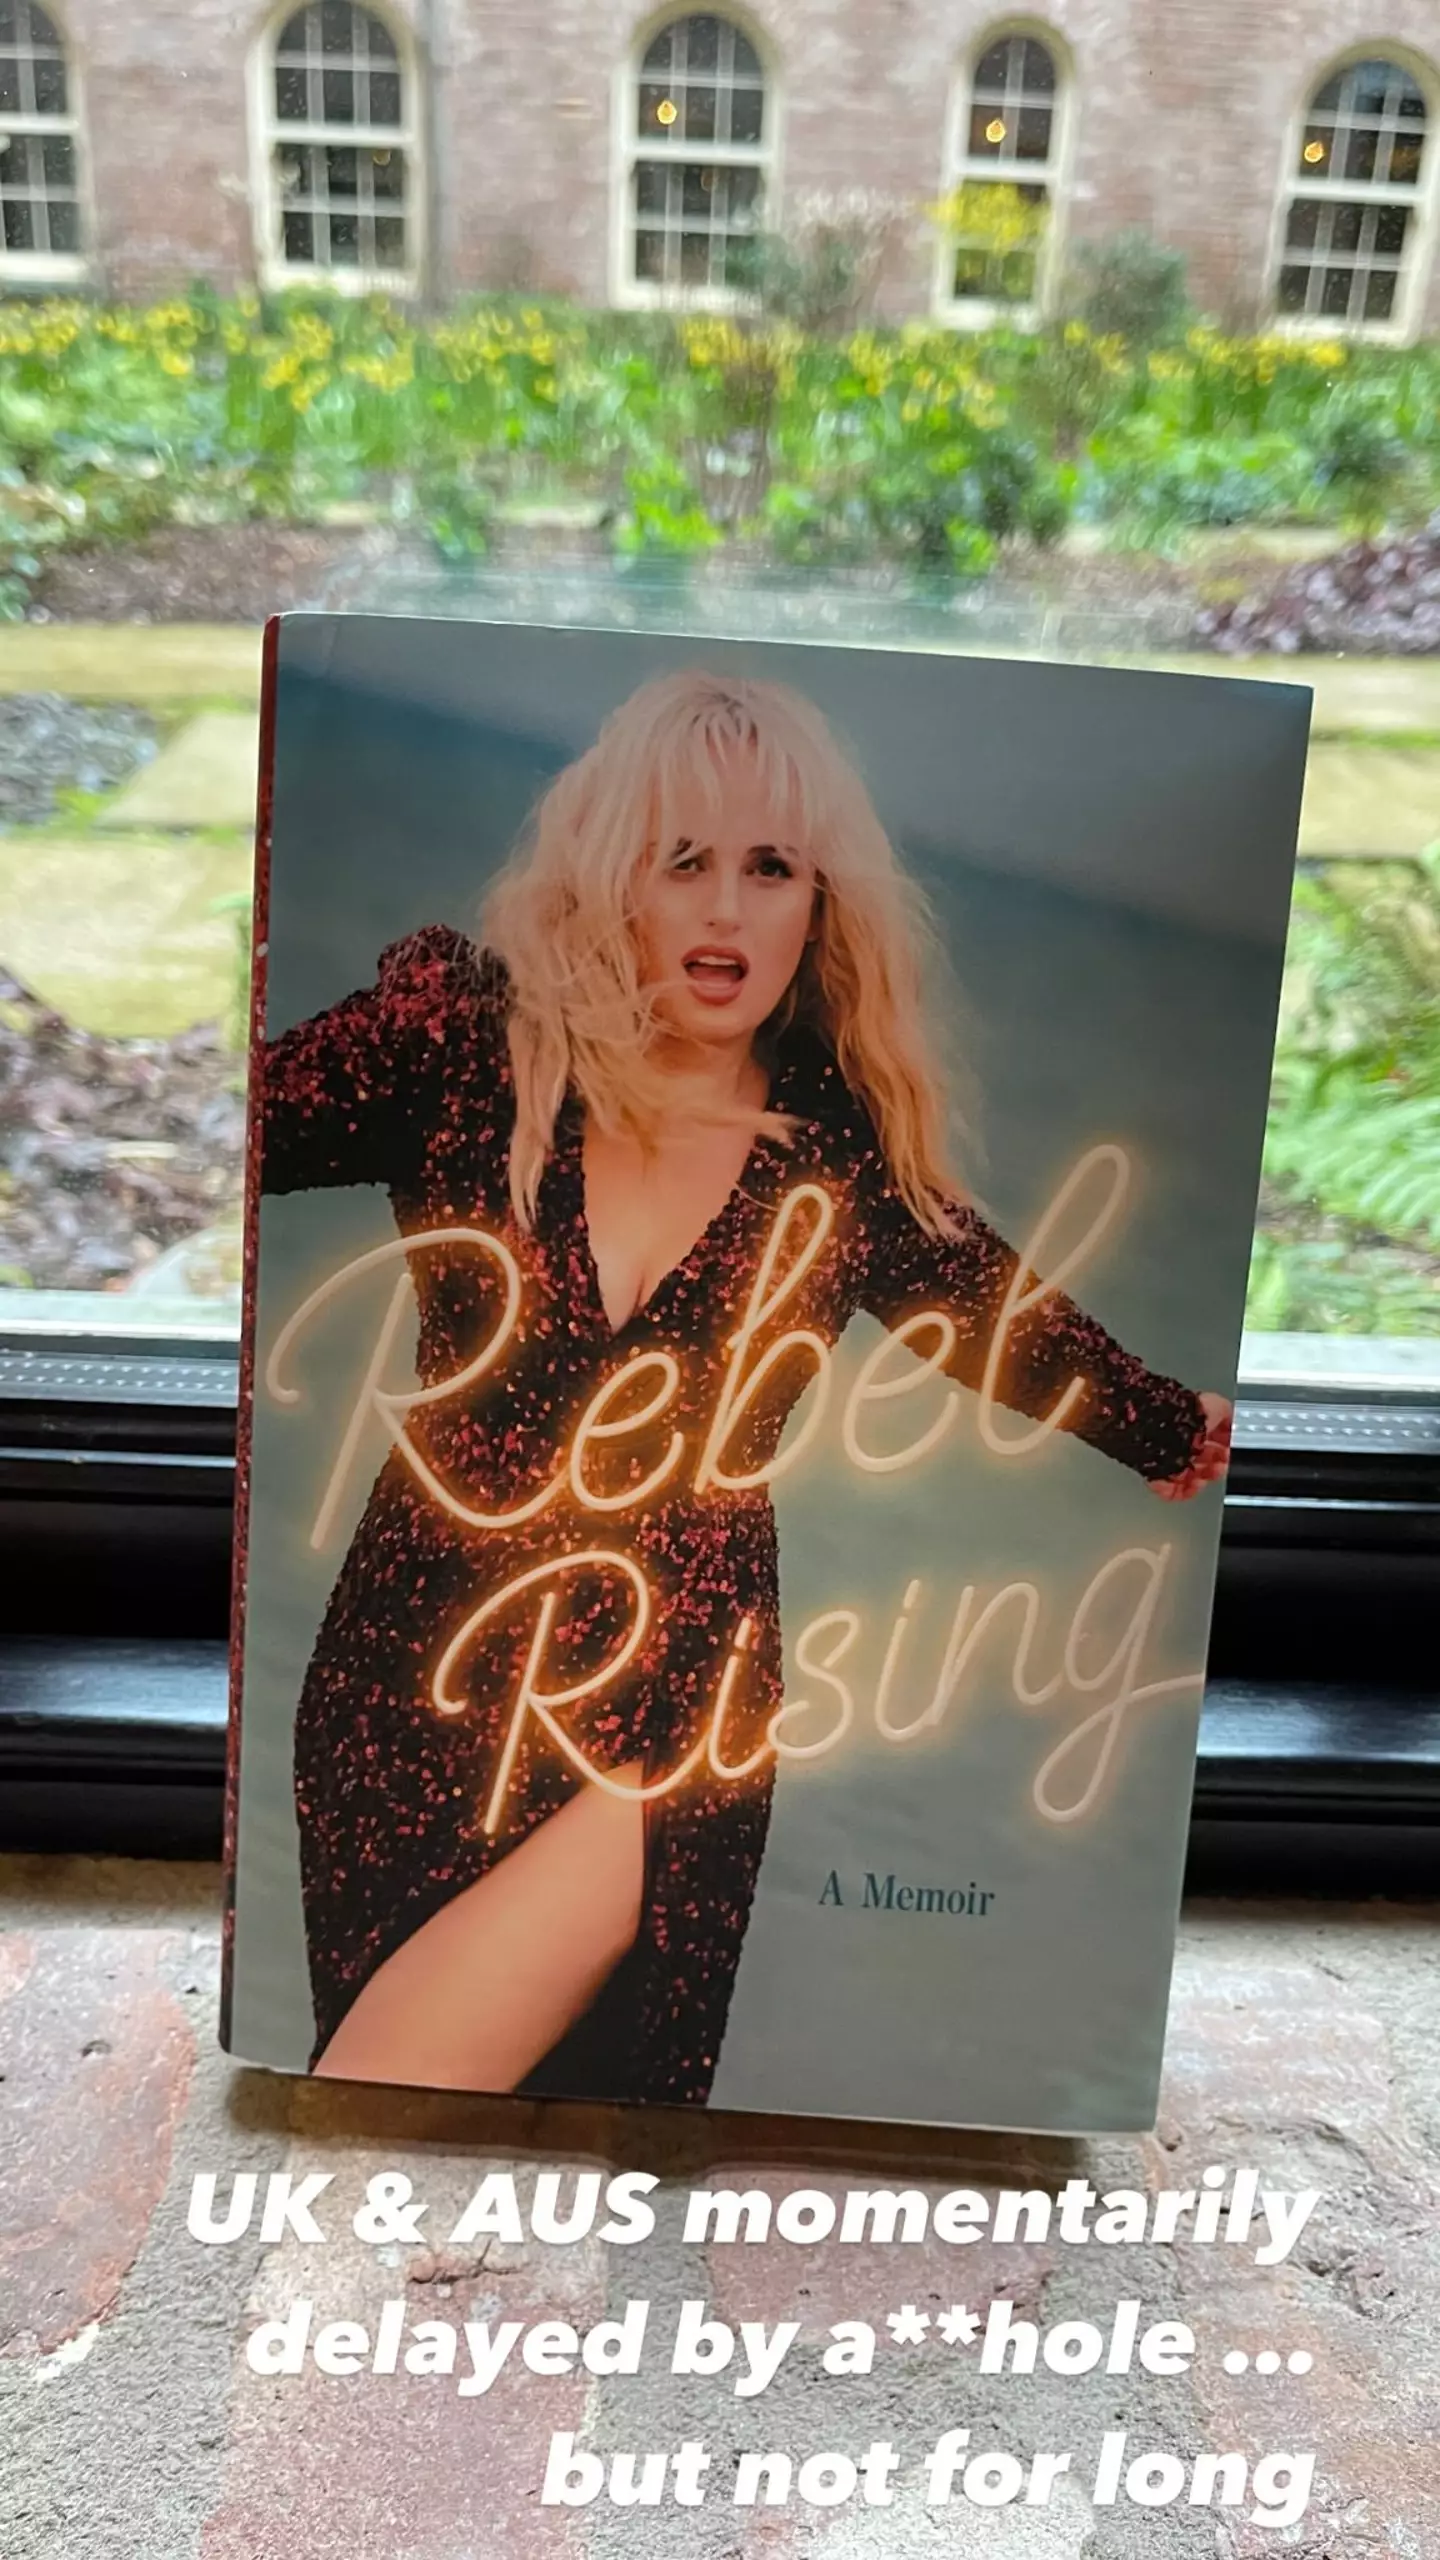 Rebel broke her silence to promote her book.